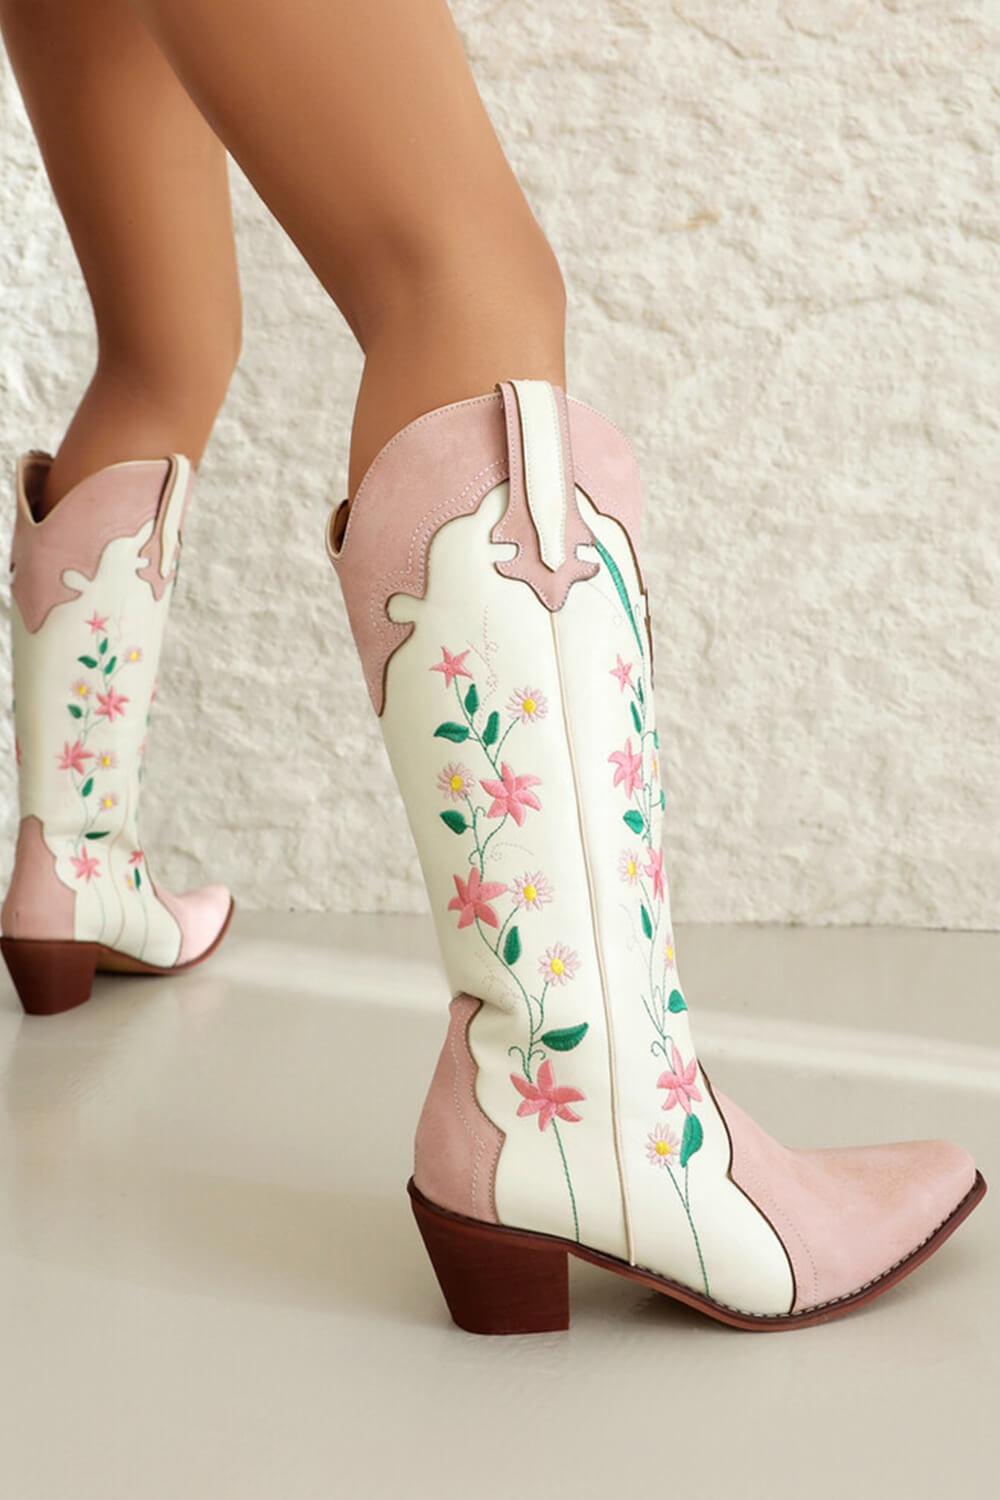 Pink Floral Printed Western Cowgirl Block Heeled Knee High Boots